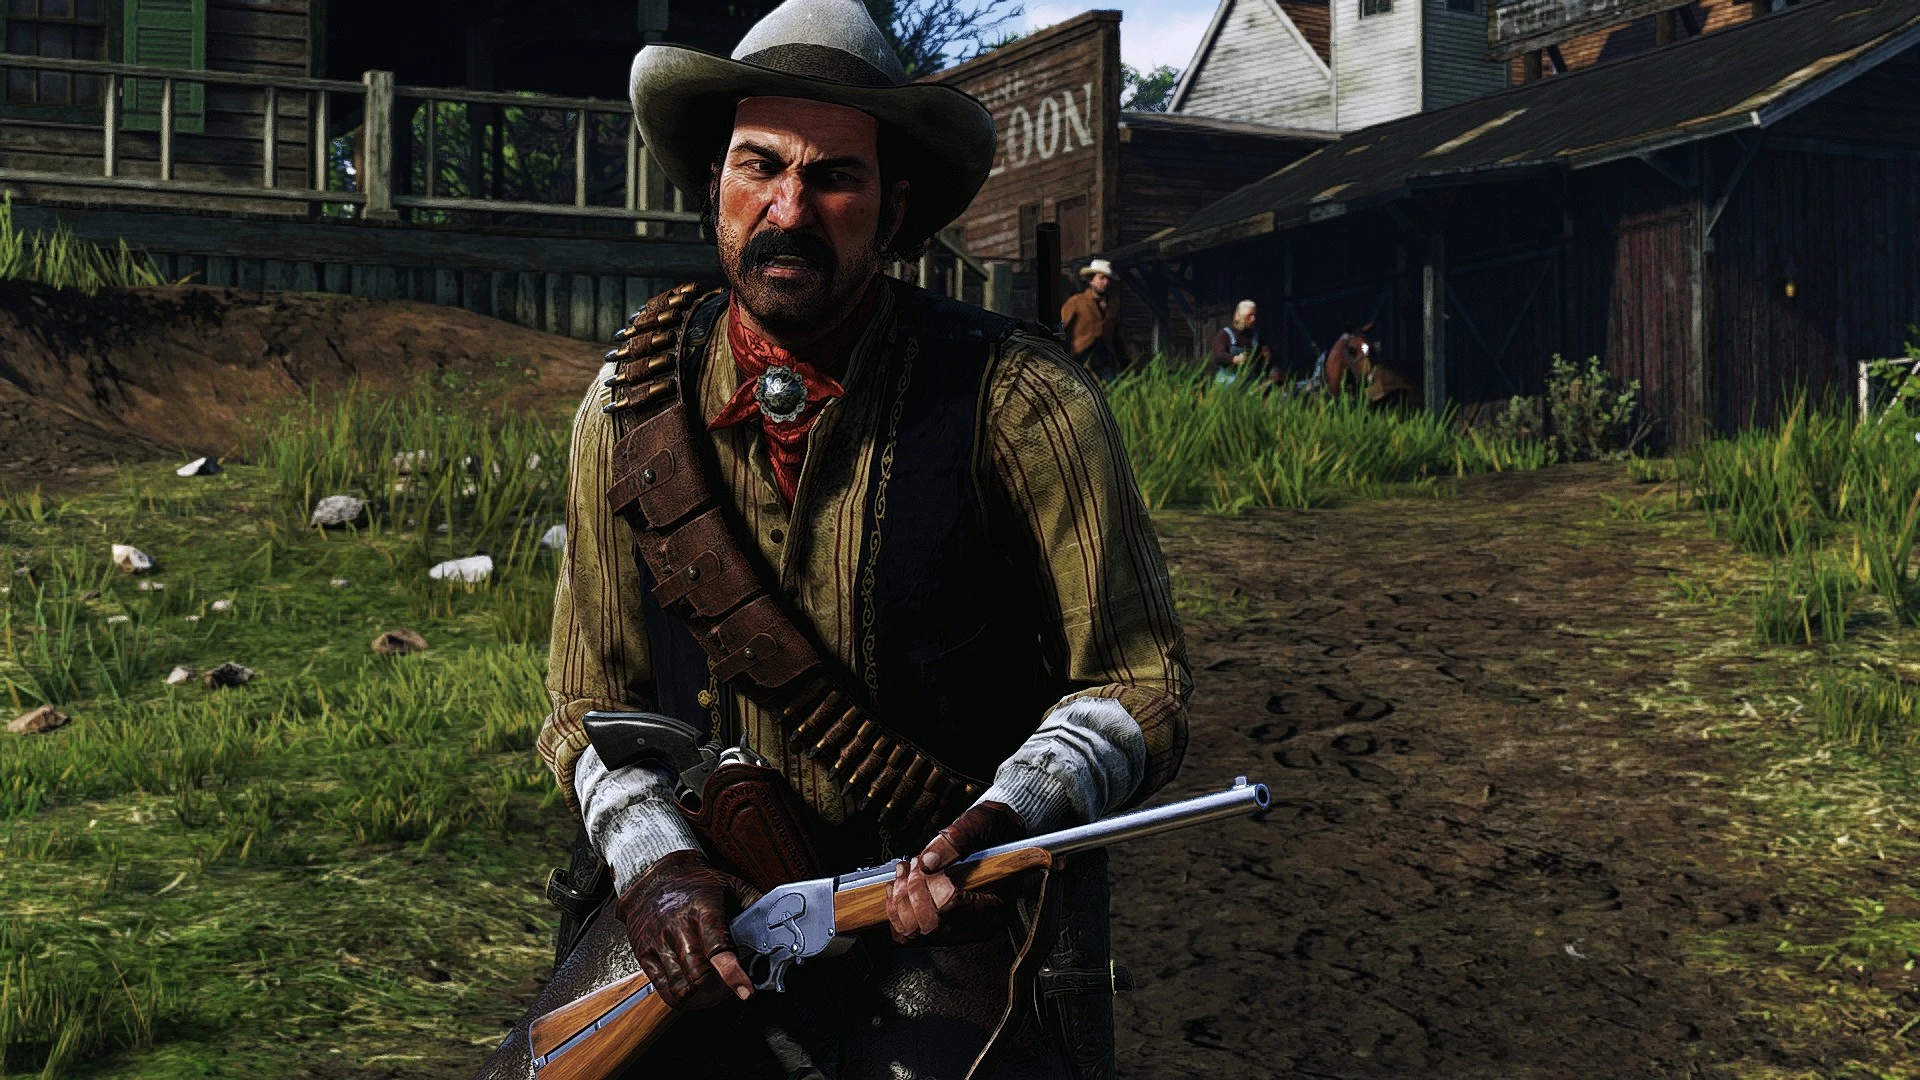 Dutch and Arthur - 1899 at Red Dead Redemption 2 Nexus - Mods and community